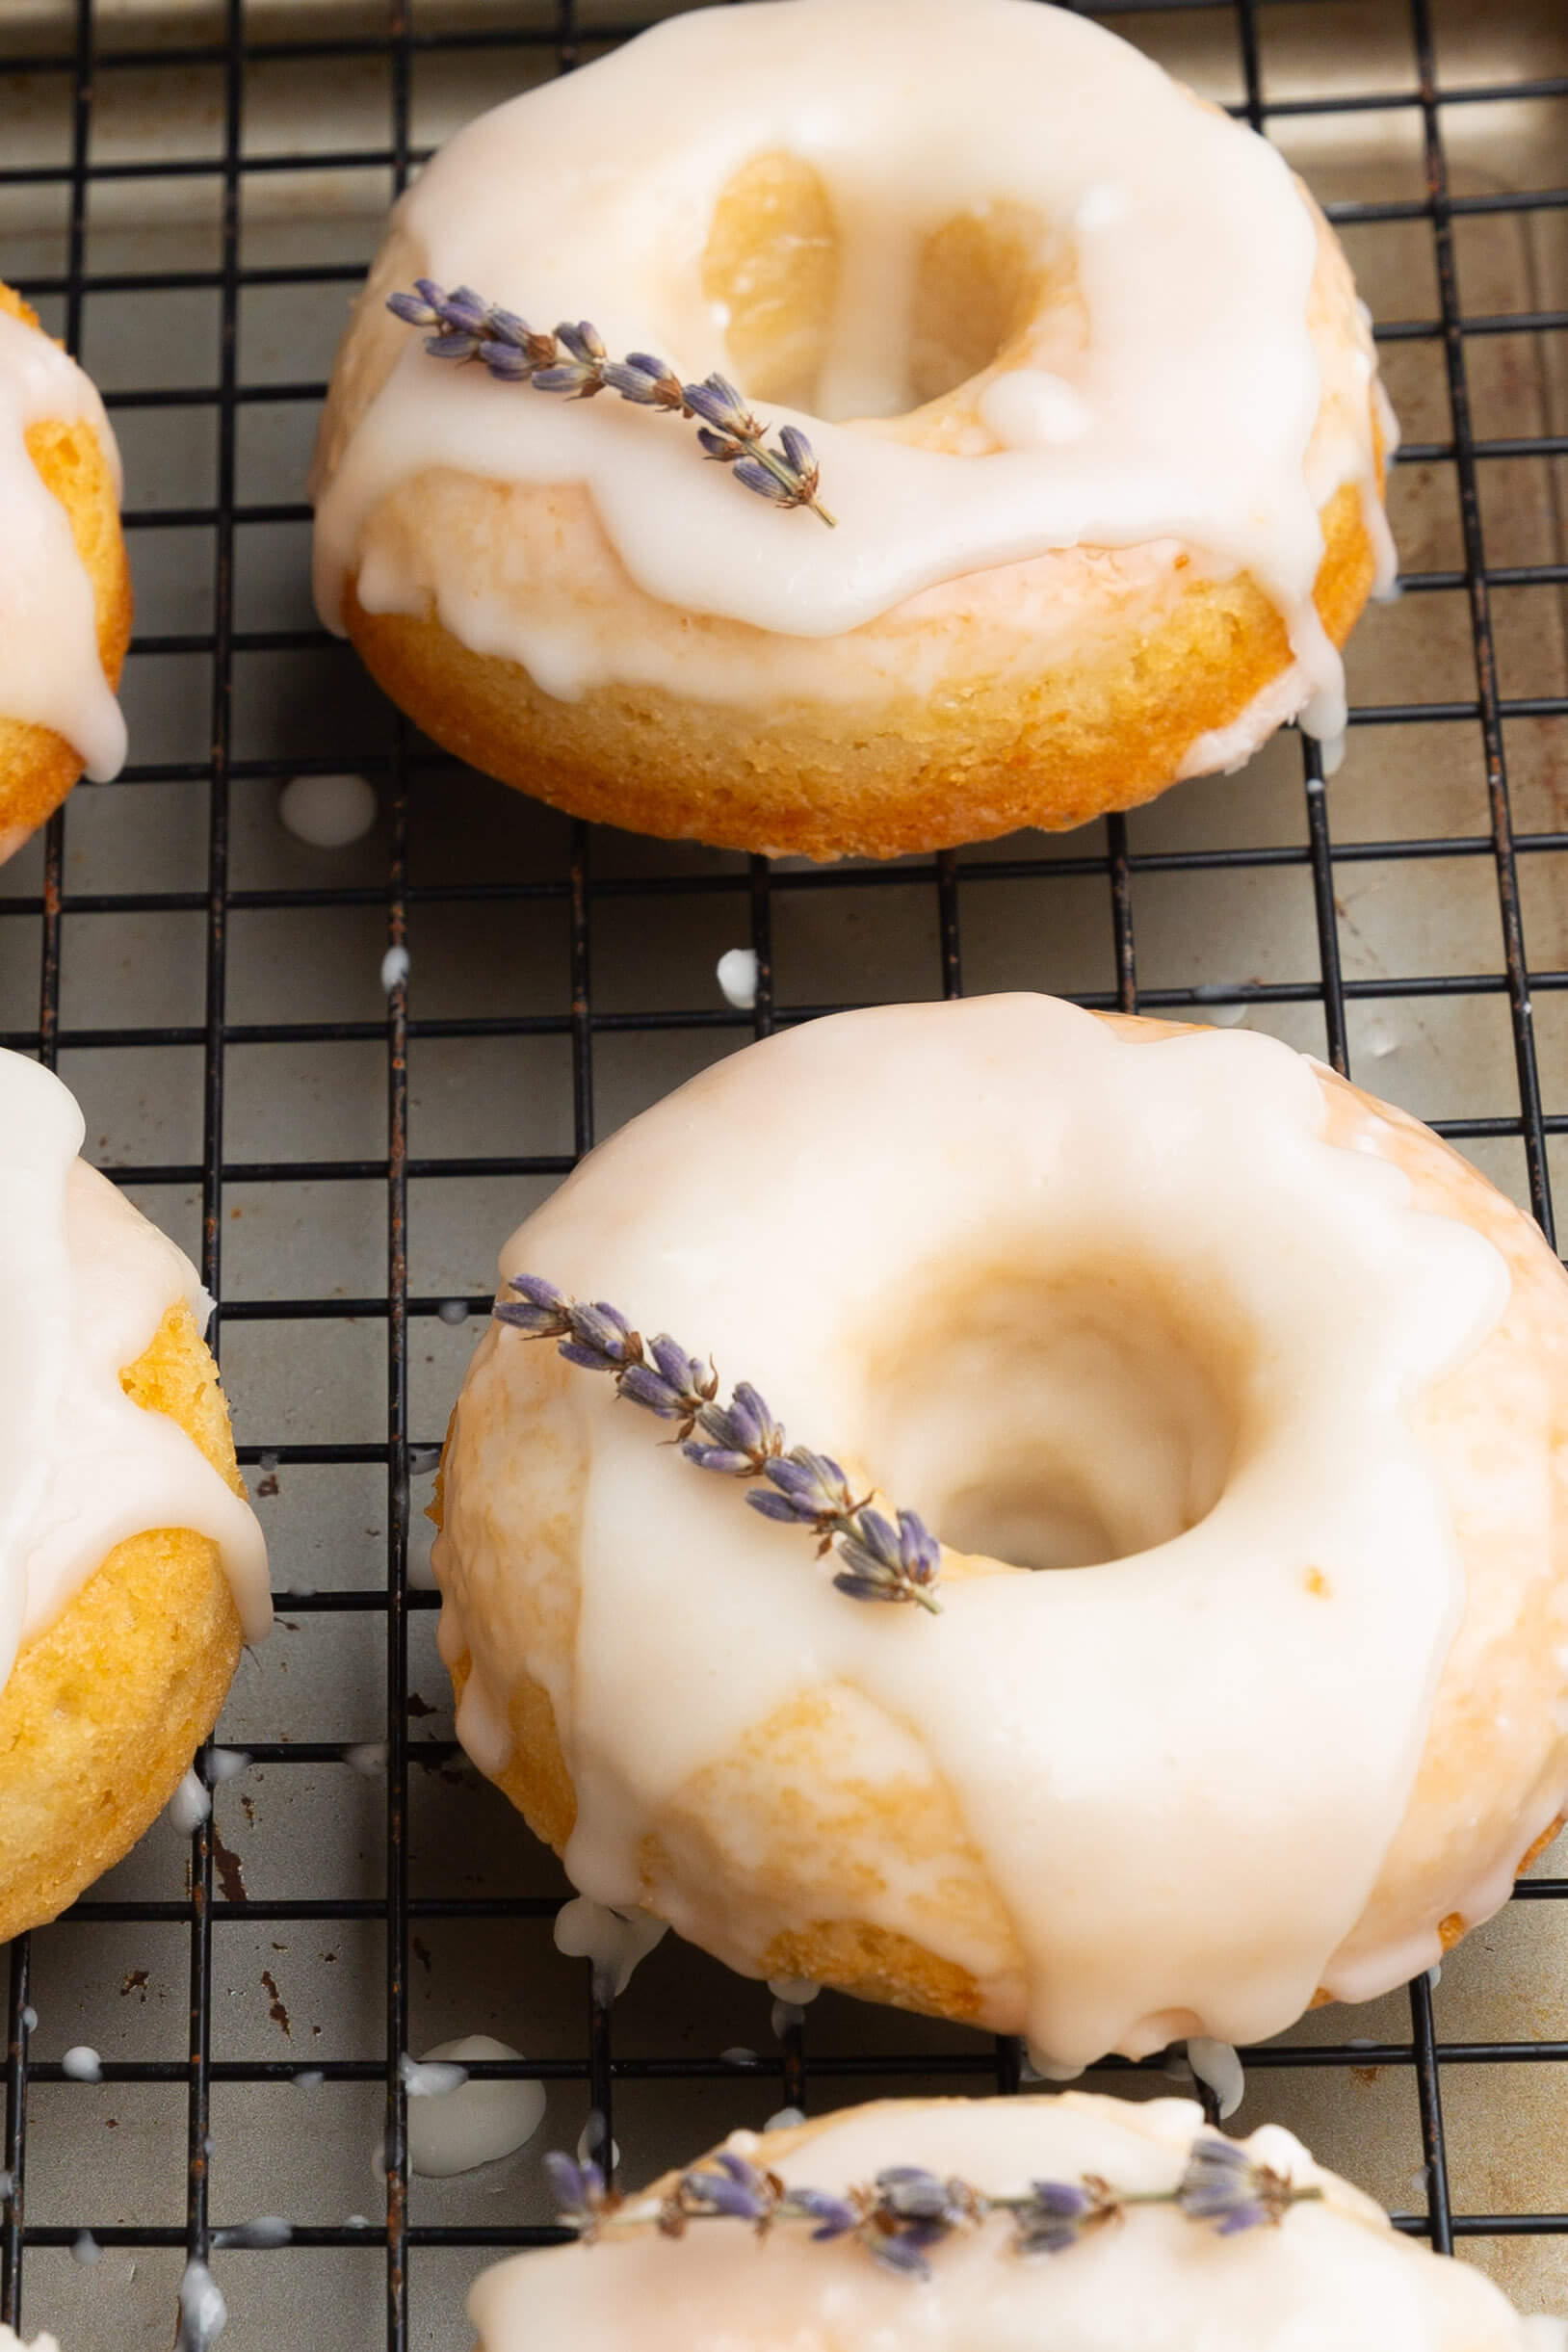 Vegan donuts with lavender icing.